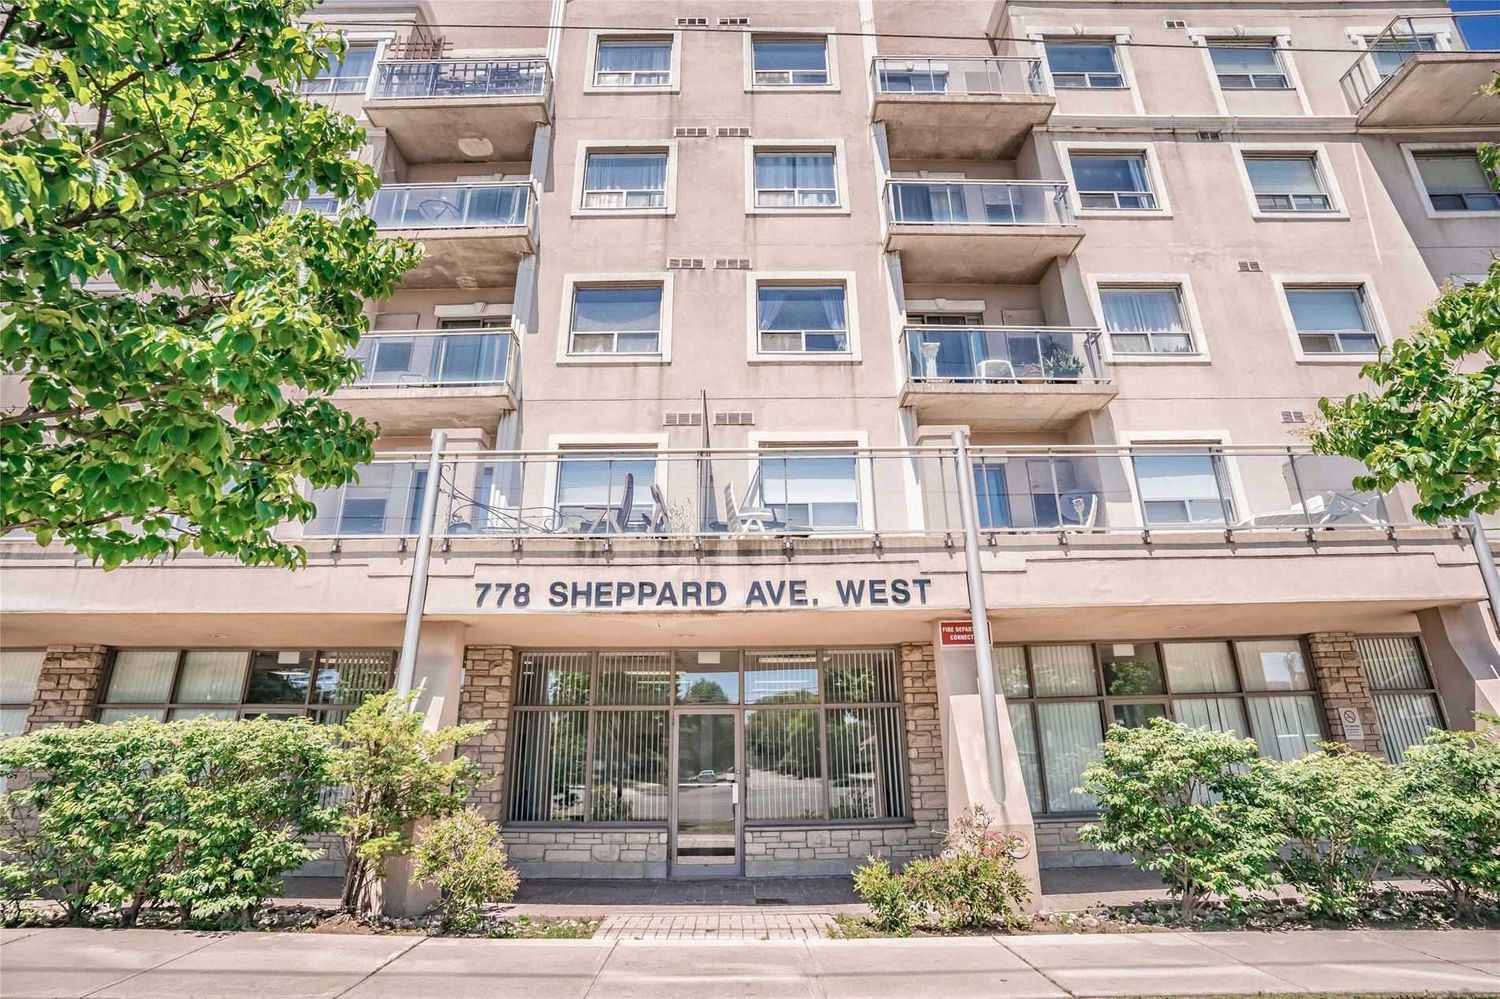 778 Sheppard Avenue W. 778 Sheppard Avenue West Condos is located in  North York, Toronto - image #2 of 3